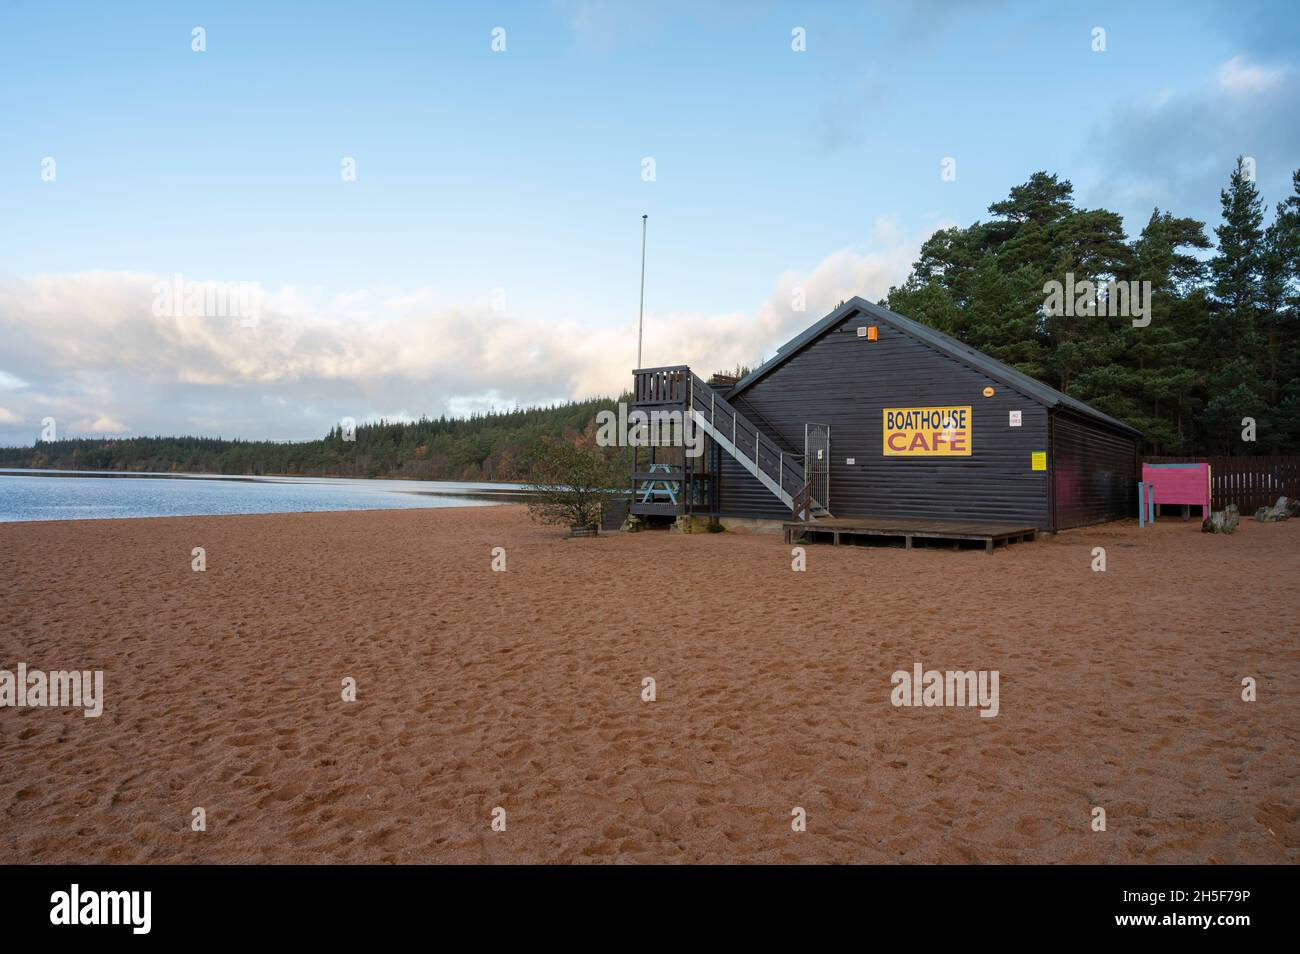 Exterior of Boathouse Cafe on Loch Morlich Beach, Cairngorms National Park. Sunrise, no people. Surrounding landscape of beach, water , forest Stock Photo